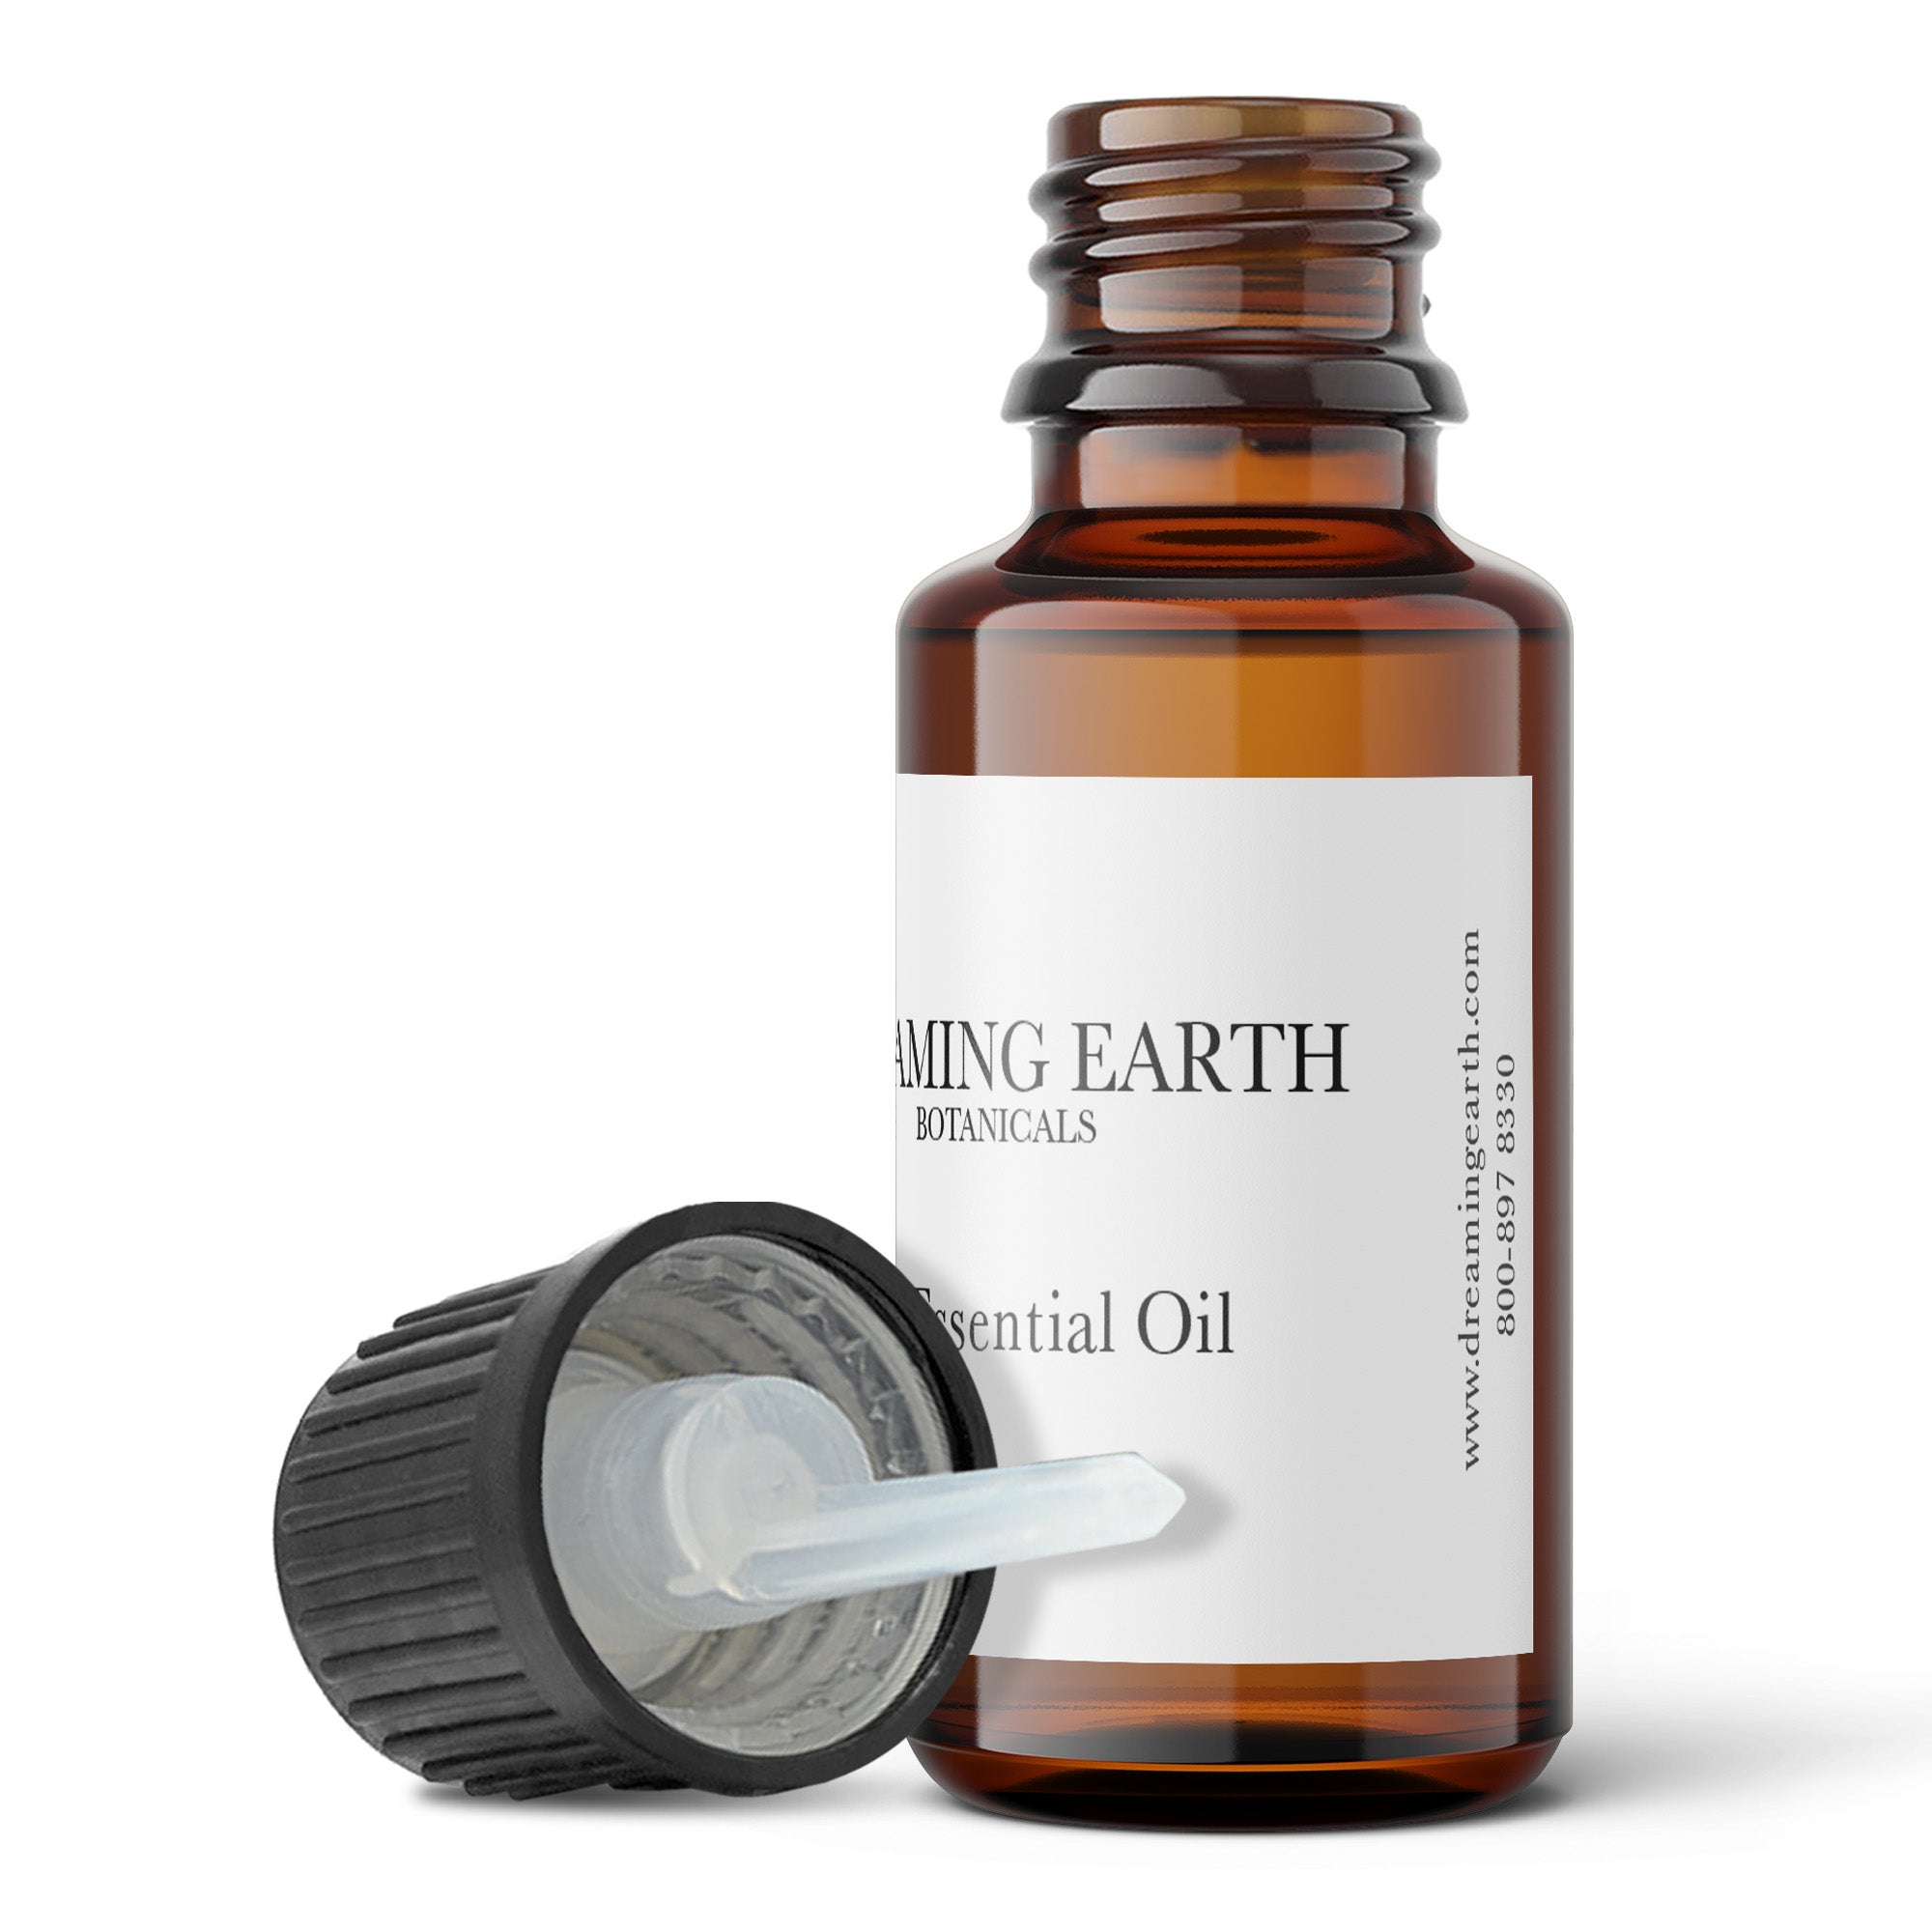 Load image into Gallery viewer, Helichrysum Organic Essential Oil - Dreaming Earth Inc
